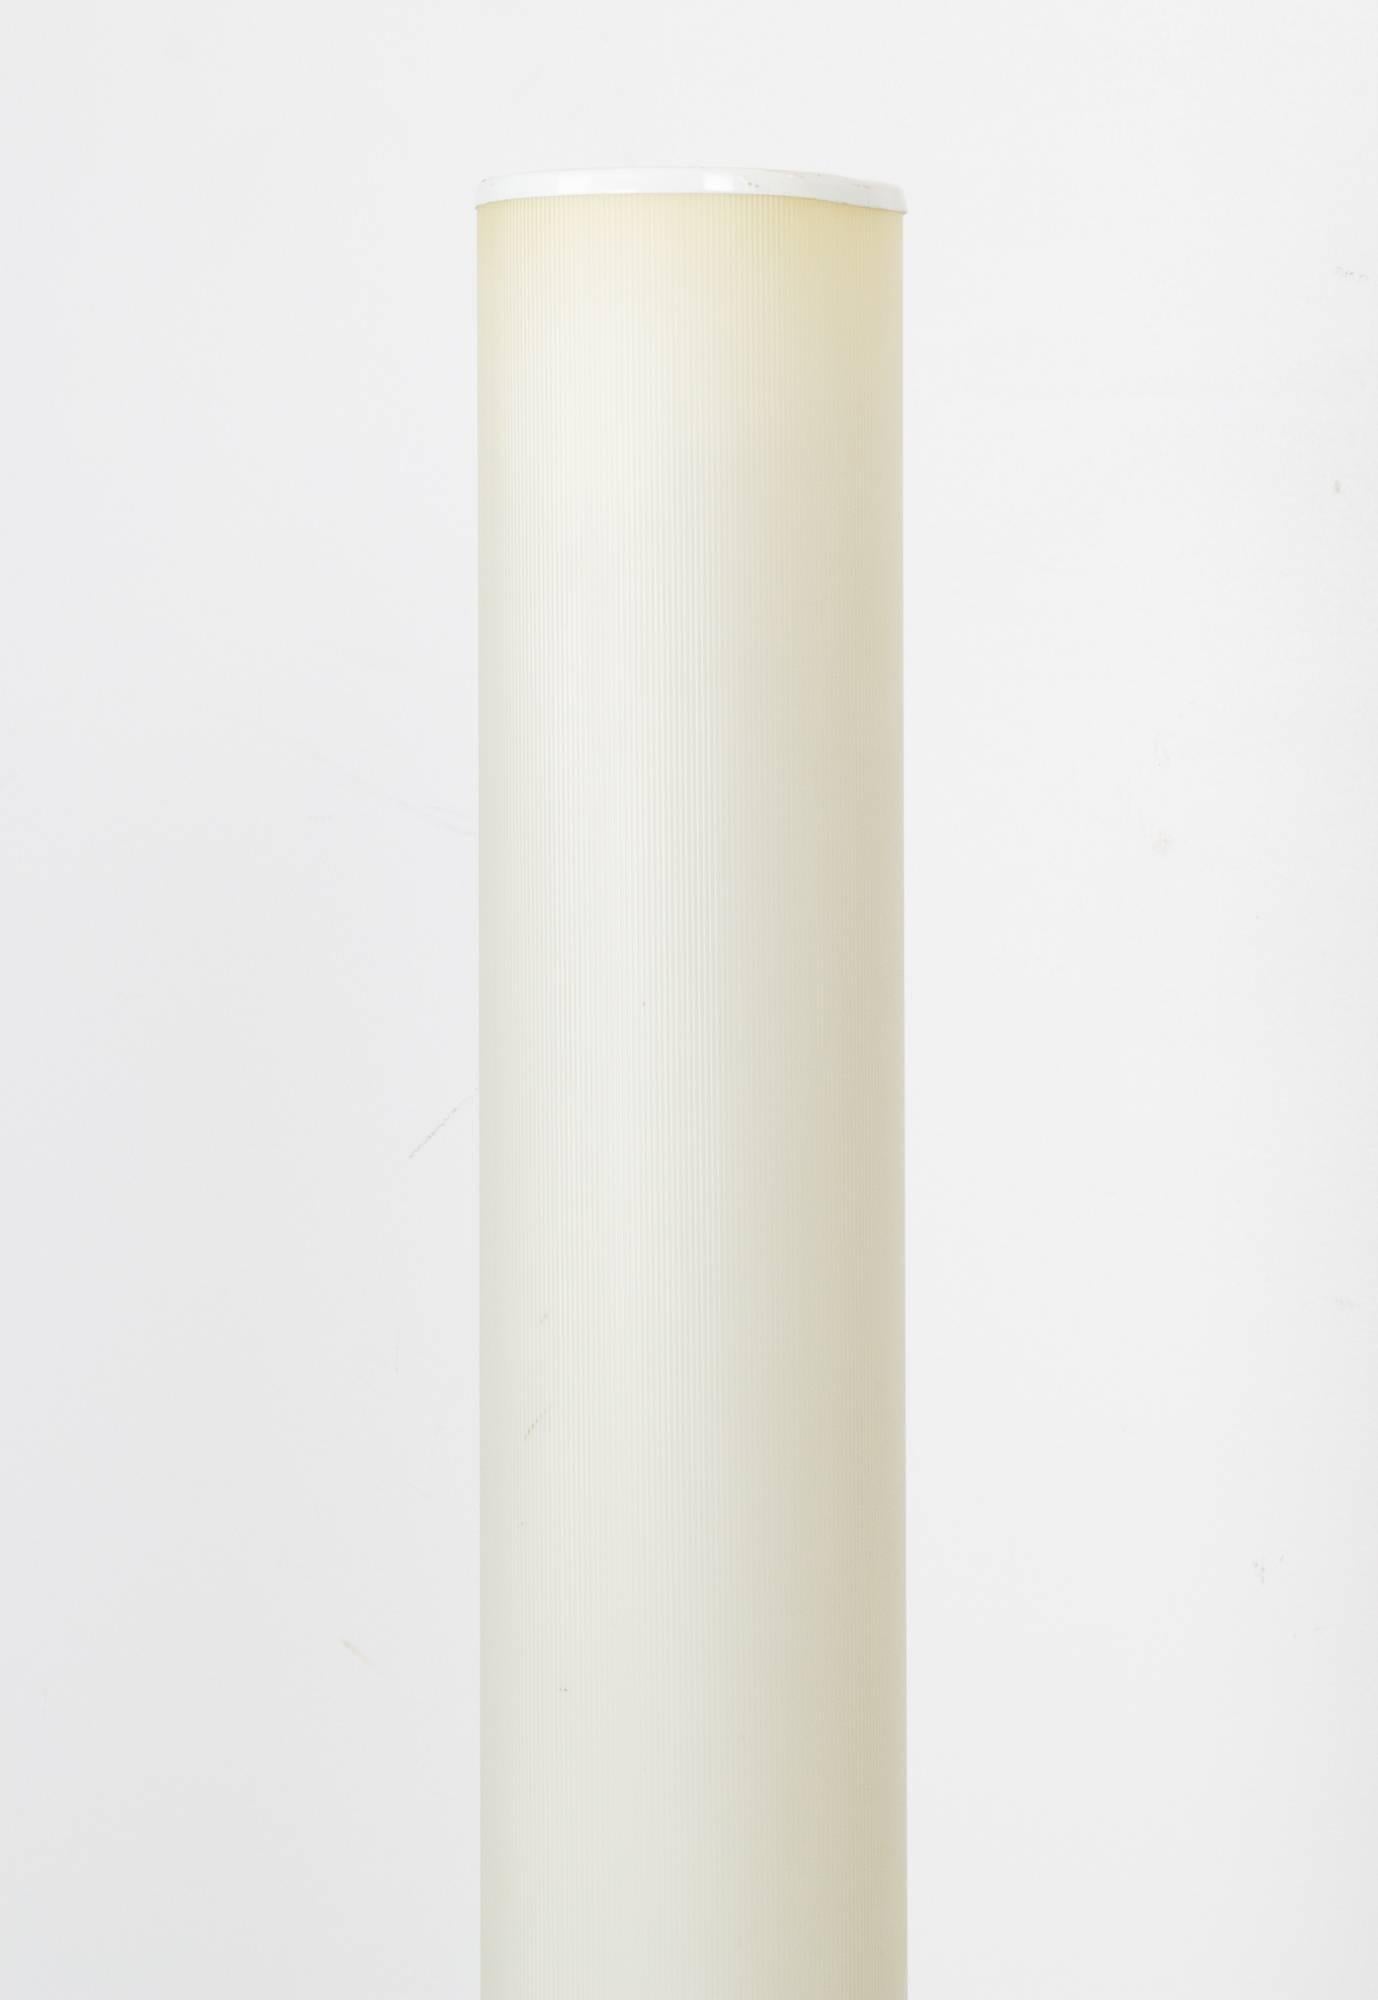 Monolithic, cylindrical floor lamp by Bill Curry for 'Design Line' series, with heavy iron base and corrugated plastic shade.